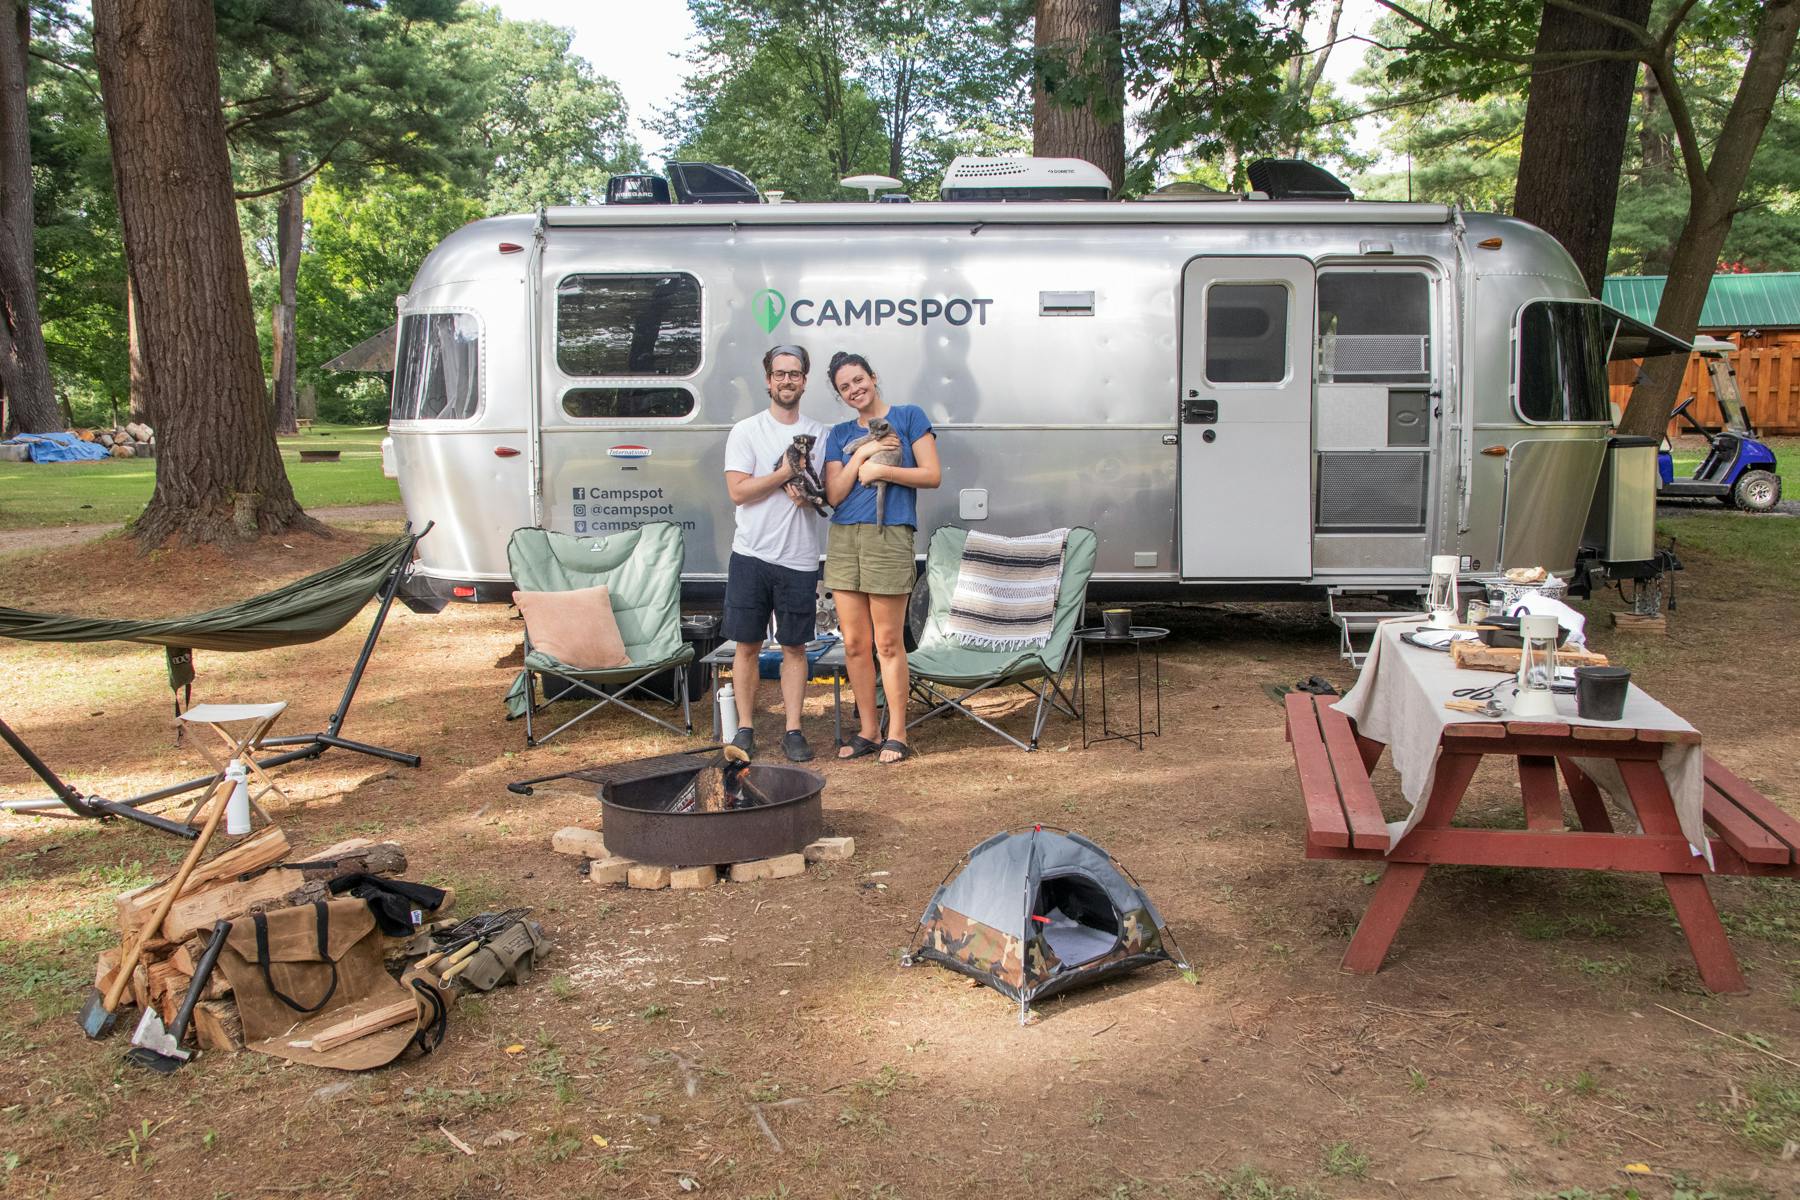 Announcing the "Find Your Campspot" Tour